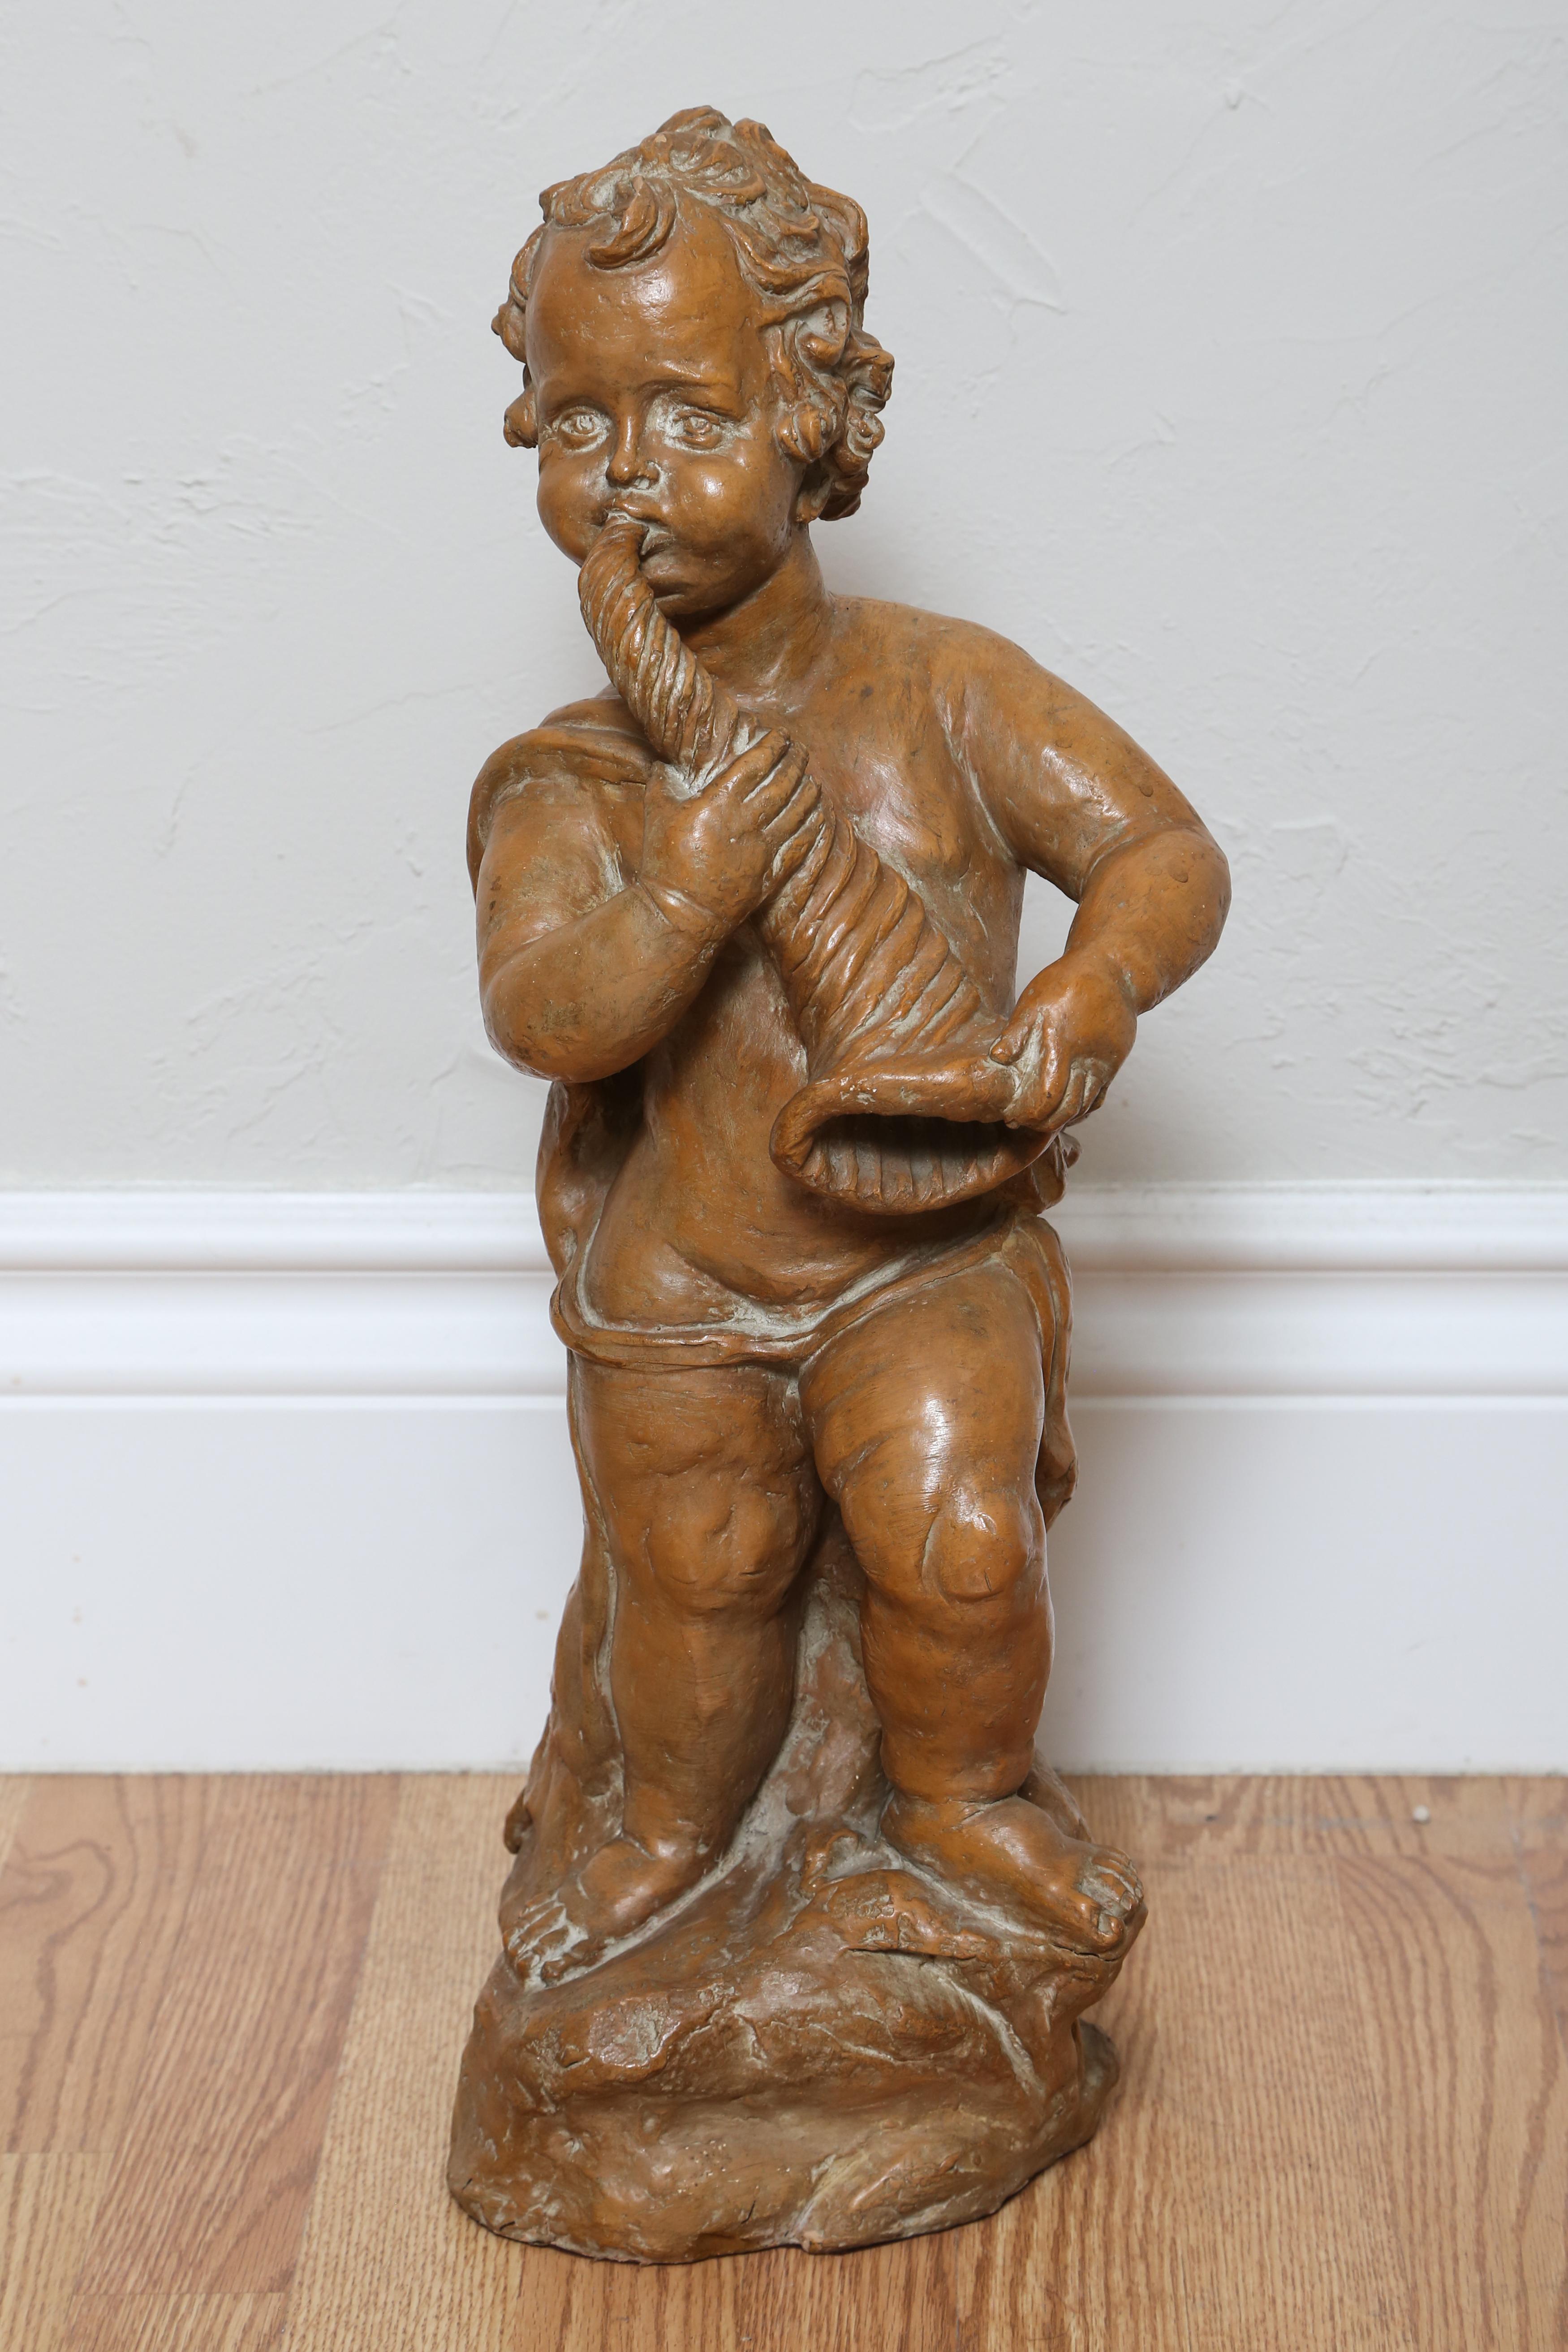 Delightful terra cotta cherub playing Horn. Made in France in the late 19th century.